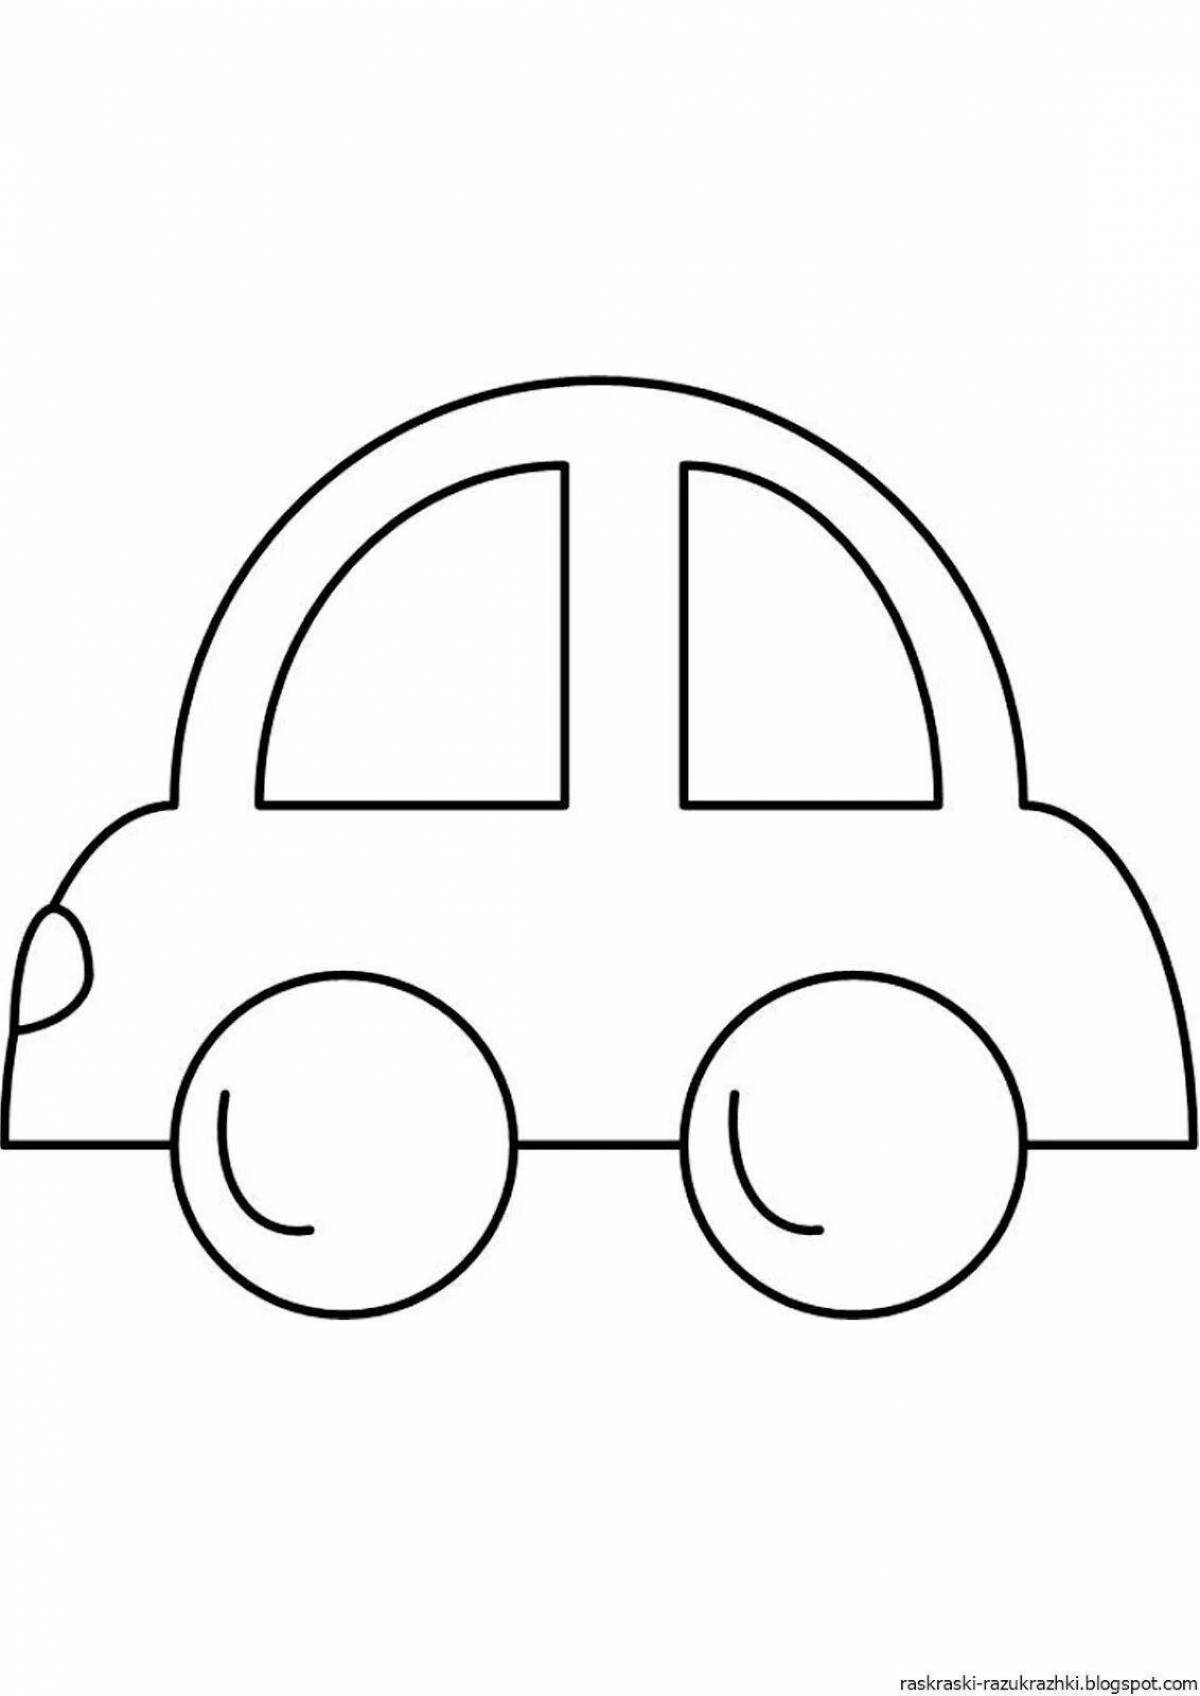 A fun car coloring book for 3 year olds